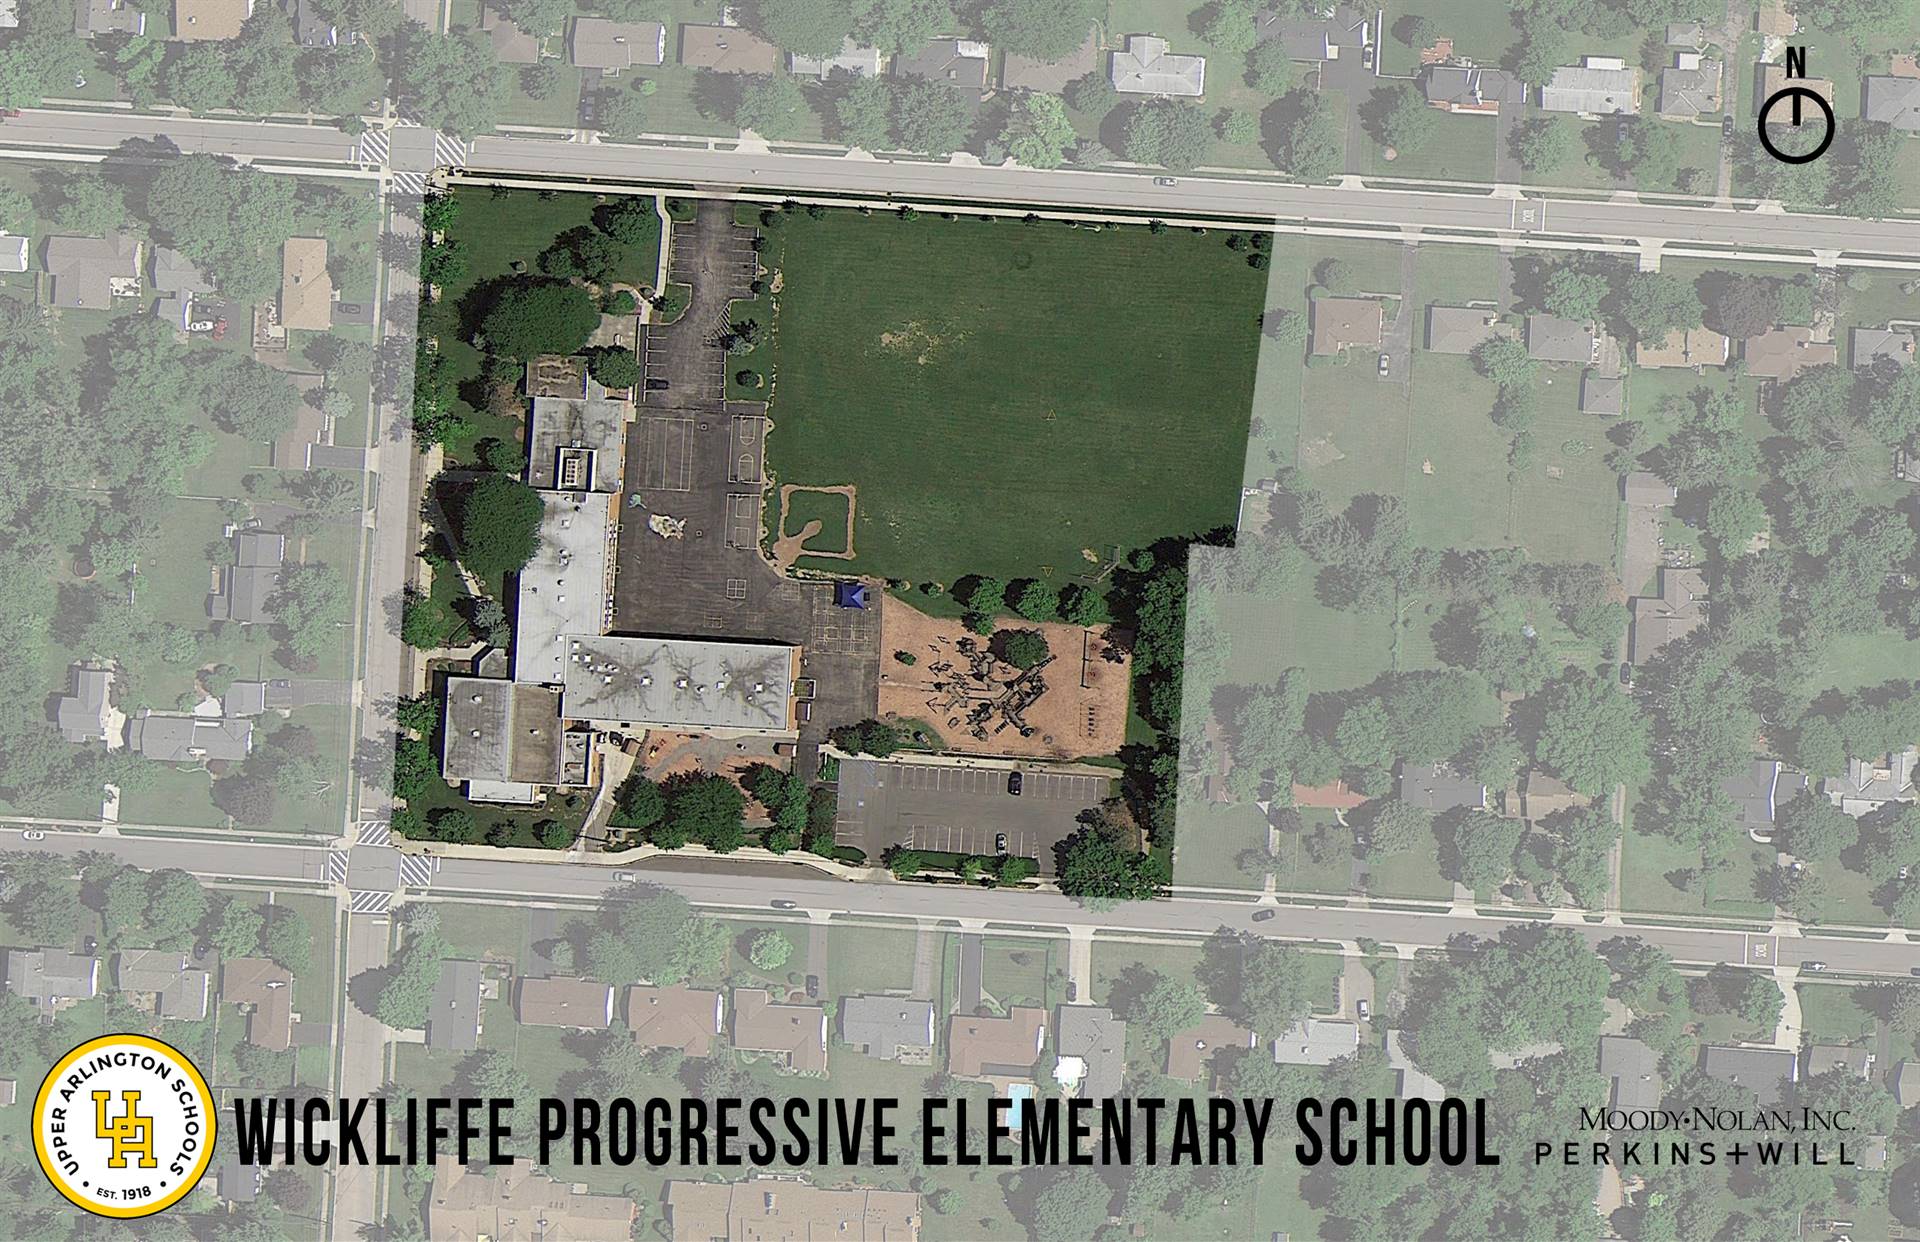 Current site plan for Wickliffe